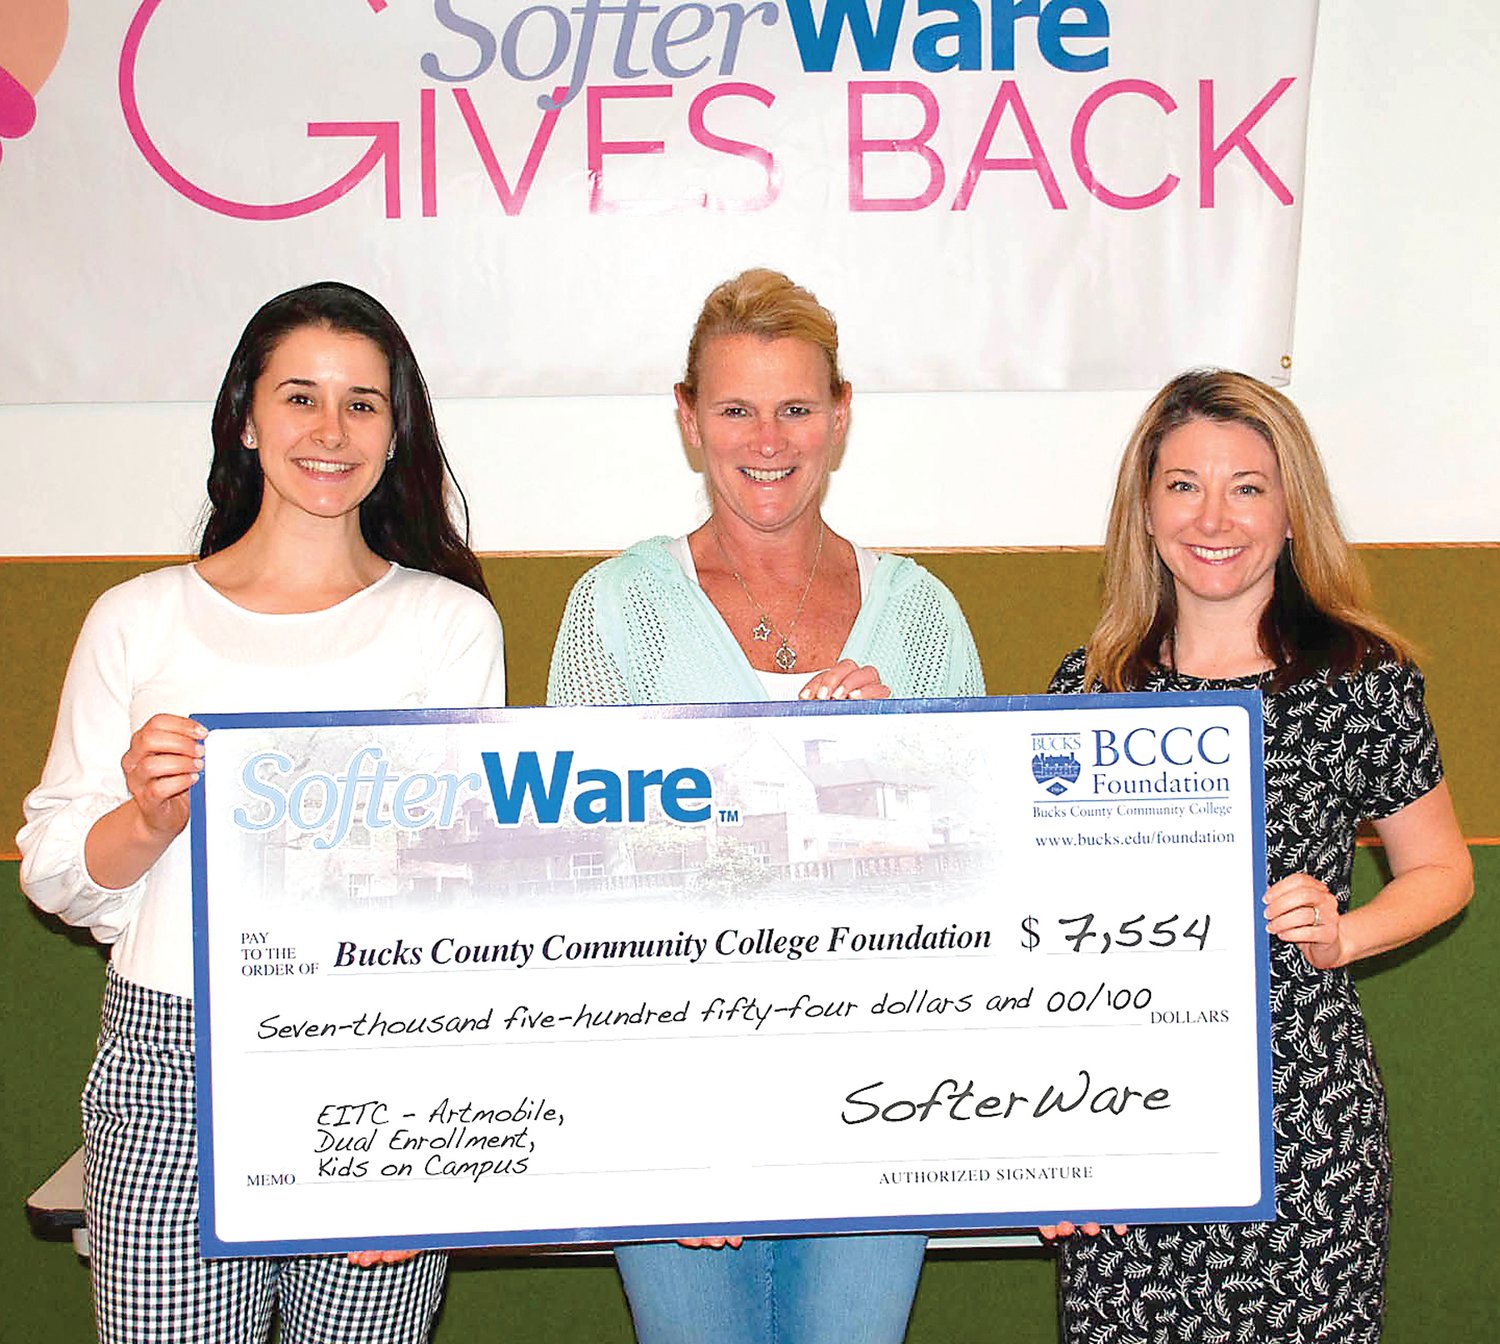 SofterWare Inc. was among several companies that donated to Bucks County Community College through the Educational Improvement Tax Credit Program. Eleanor Stasio, center, SofterWare’s director of implementation, presents the donation to Samantha Walter, left, and Christina McGinley, both with the Bucks County Community College Foundation.